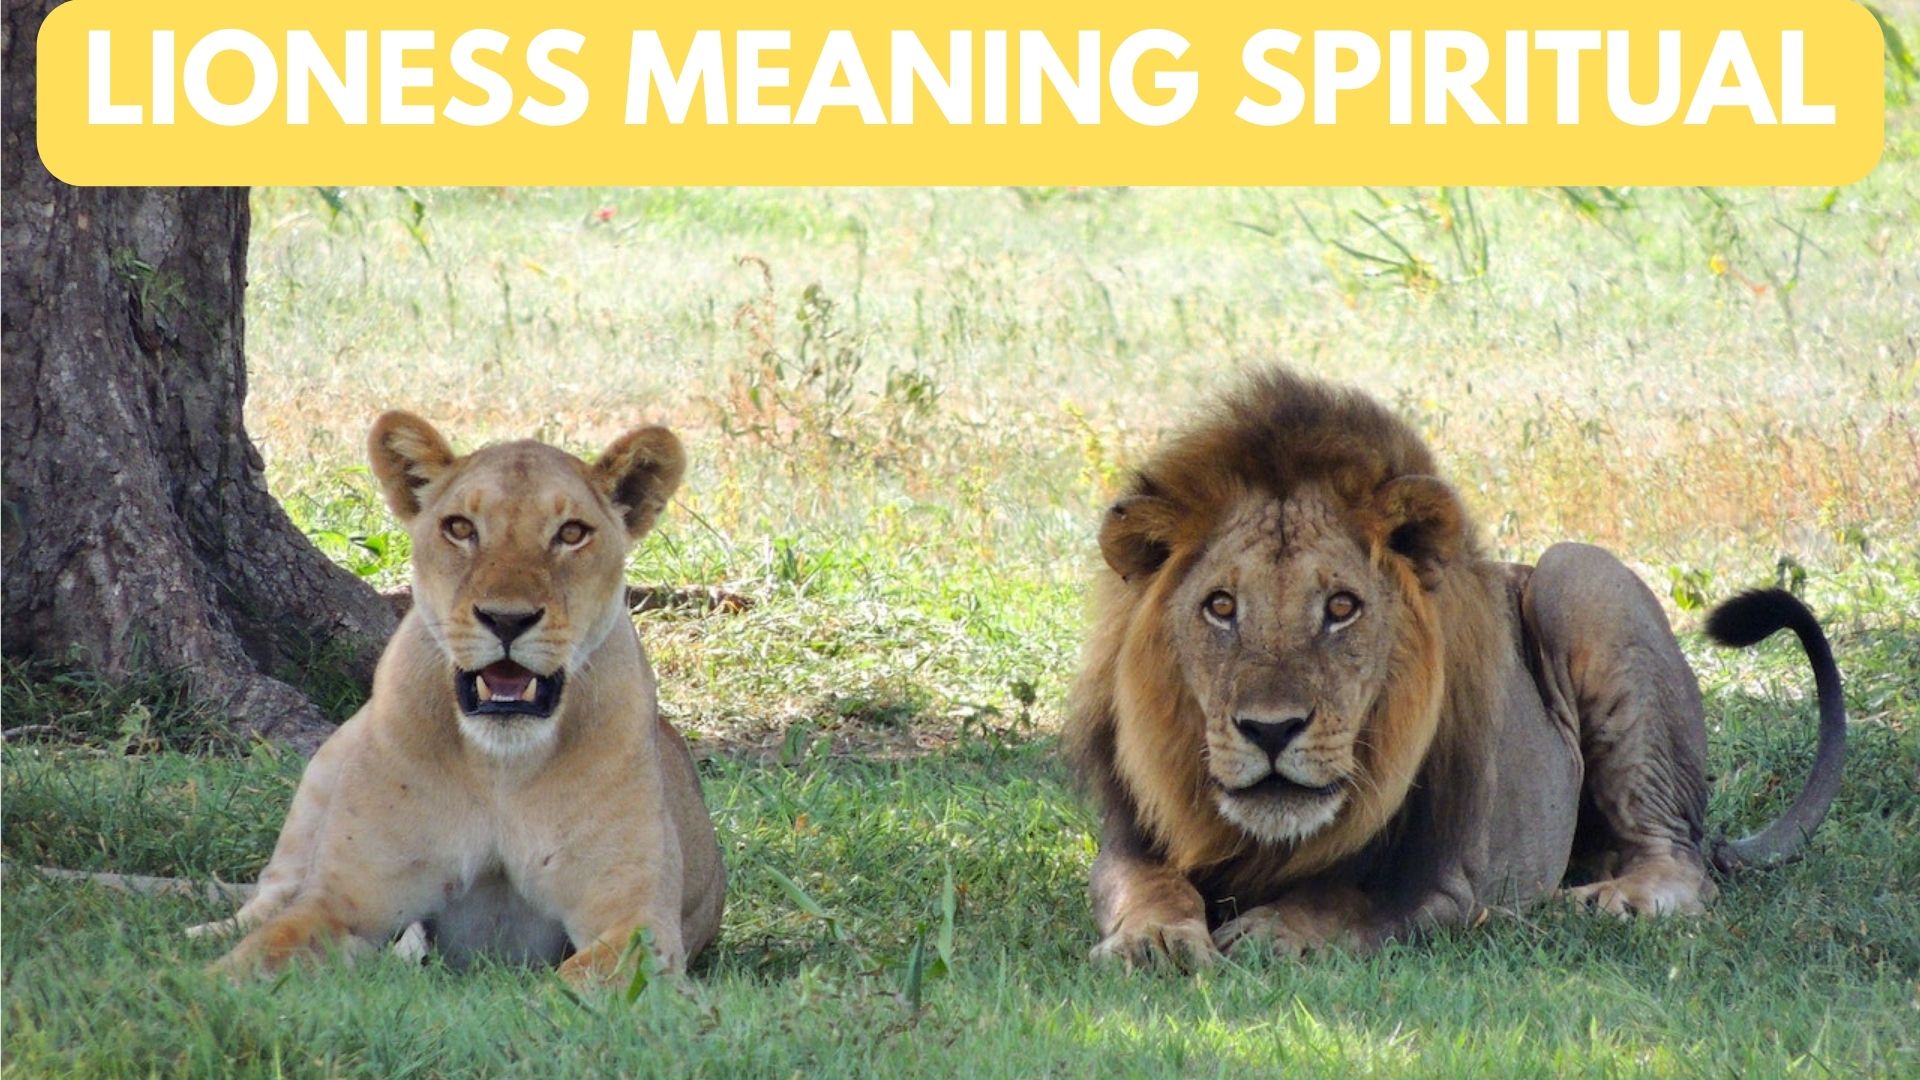 Lioness Meaning Spiritual - Courage & Strength